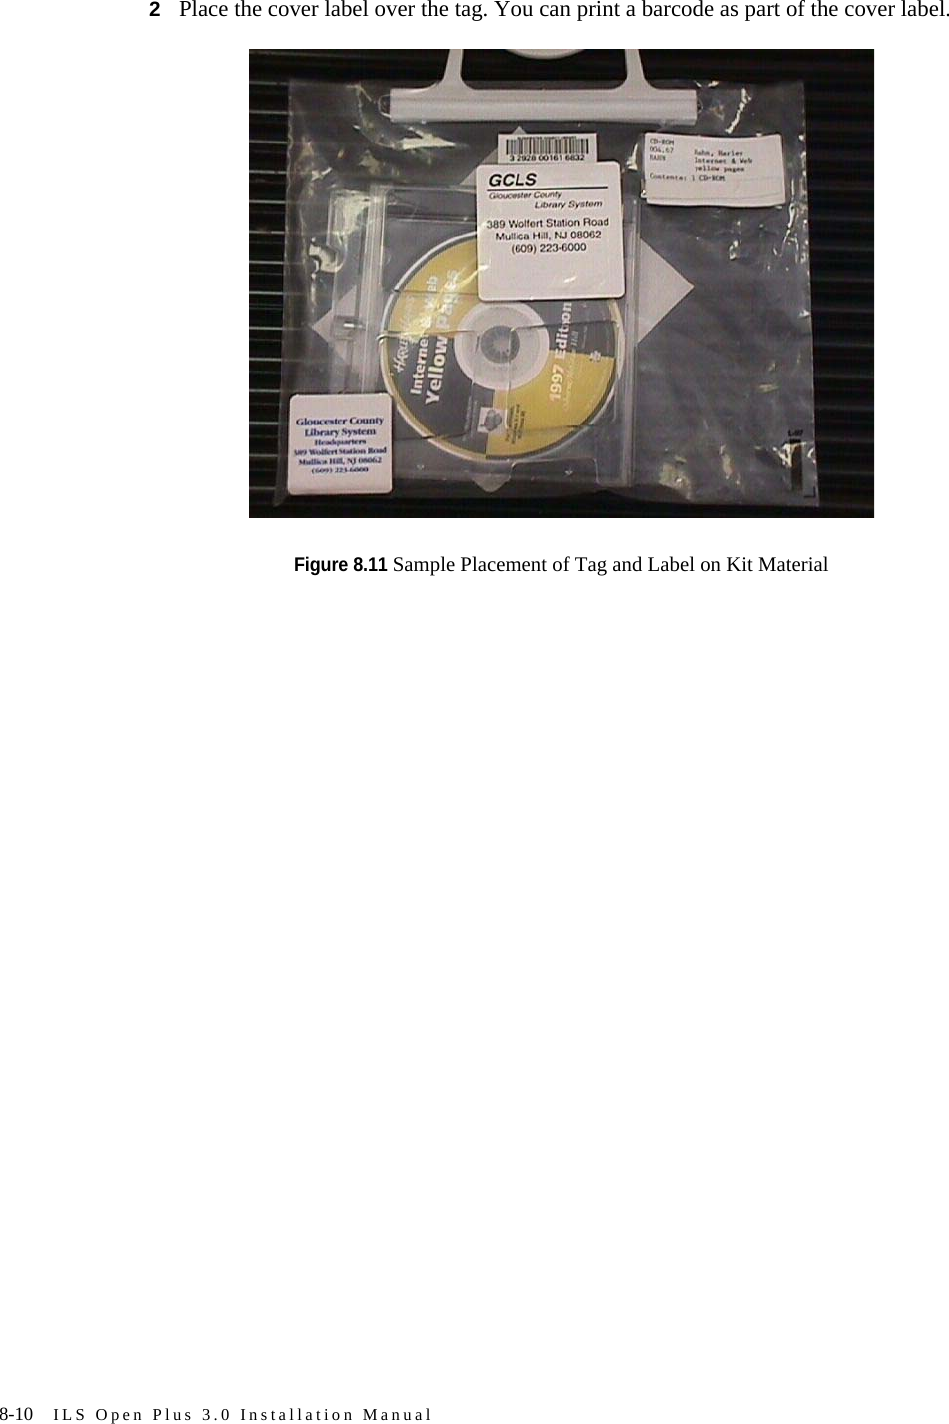 8-10 ILS Open Plus 3.0 Installation Manual2Place the cover label over the tag. You can print a barcode as part of the cover label.Figure 8.11 Sample Placement of Tag and Label on Kit Material 